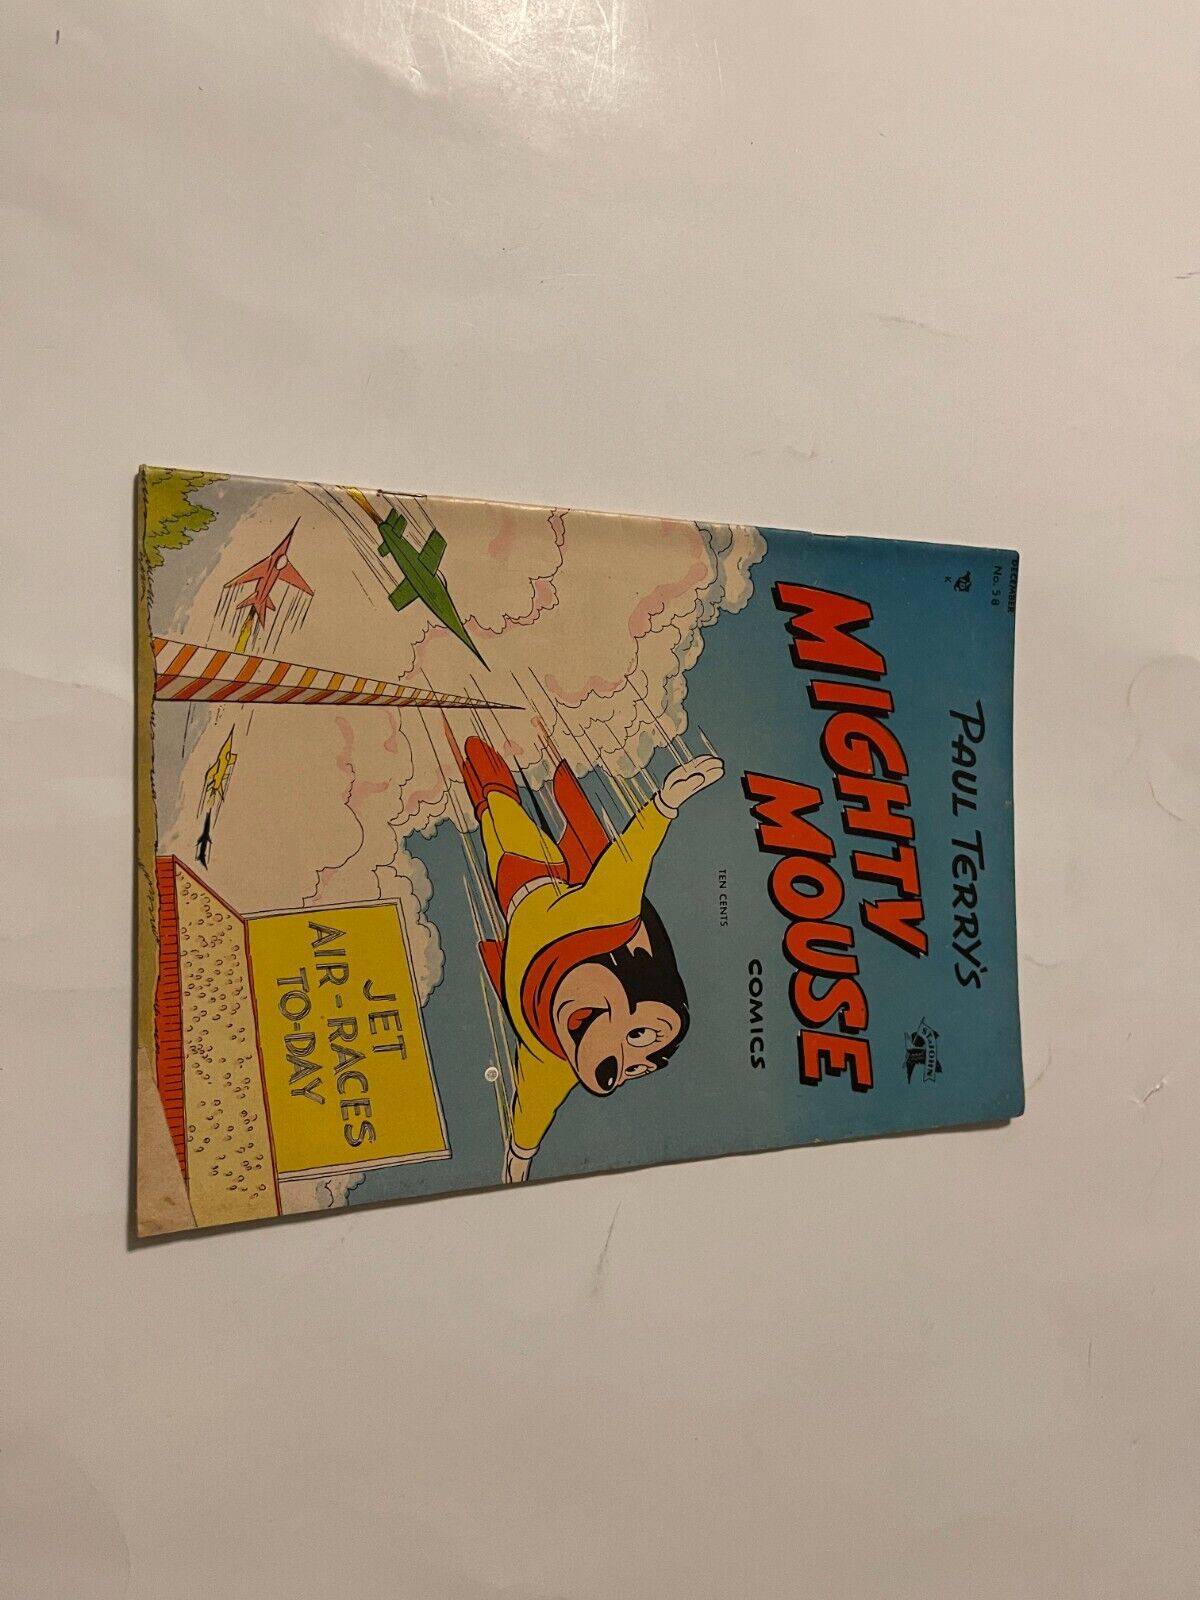 Mighty Mouse #58 (Jun 1951) VG St. Johns Comic